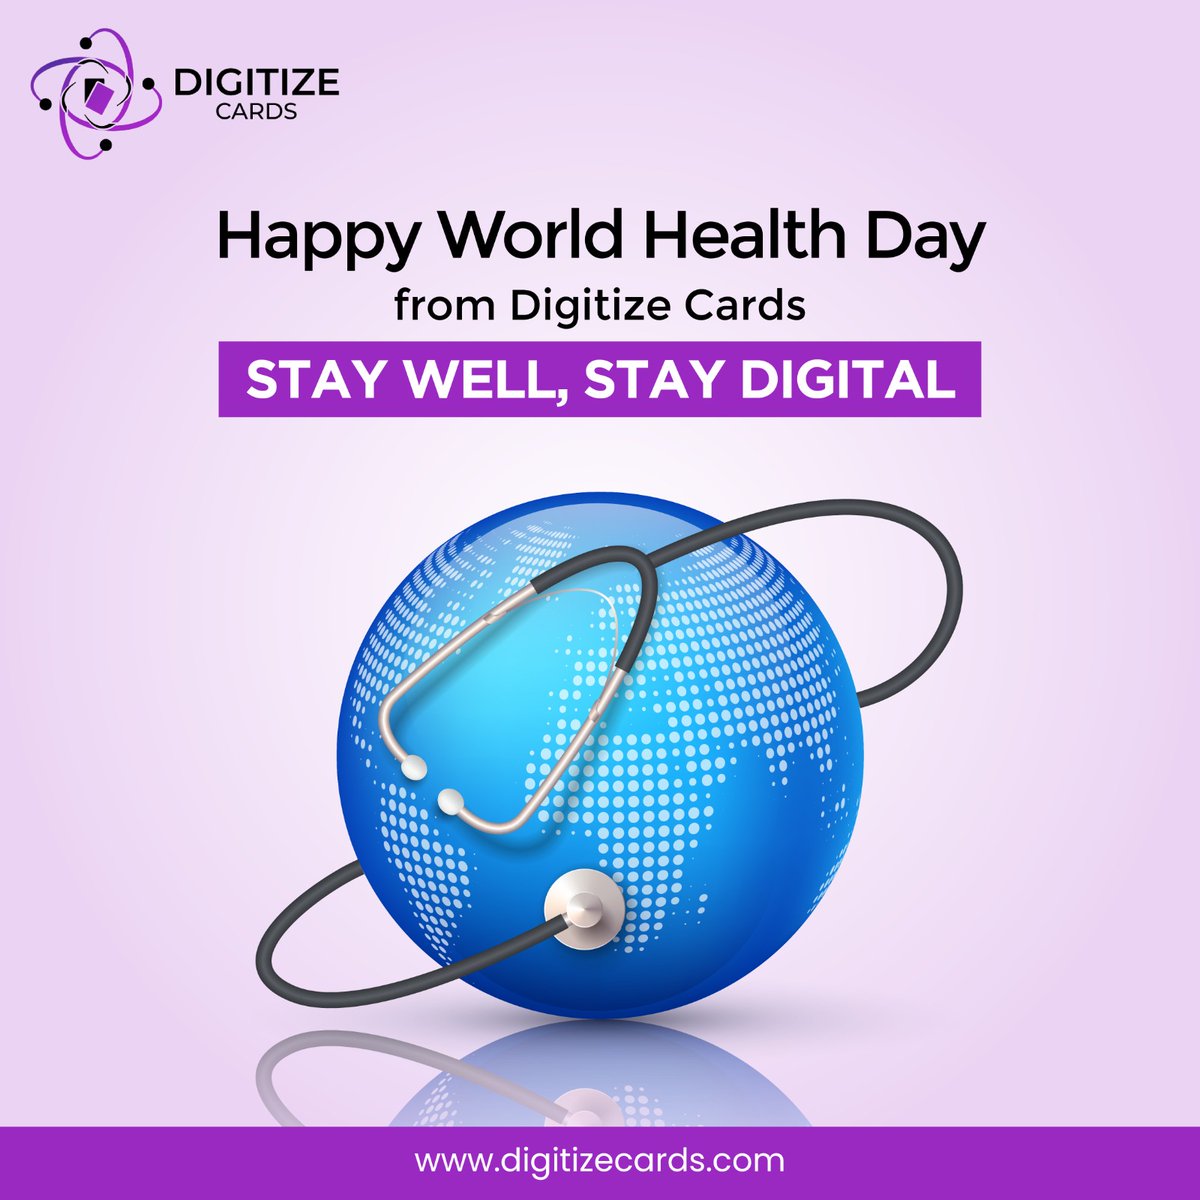 Happy World Health Day! 🌟🍃 Let's revolutionize how we stay connected and healthy with Digitize Cards. Embrace wellness in every swipe and tap, staying digital, staying fit. 💪📱 
#DigitalHealthRevolution #WorldHealthDayWithDigitize #digitalcards  #digitizecards